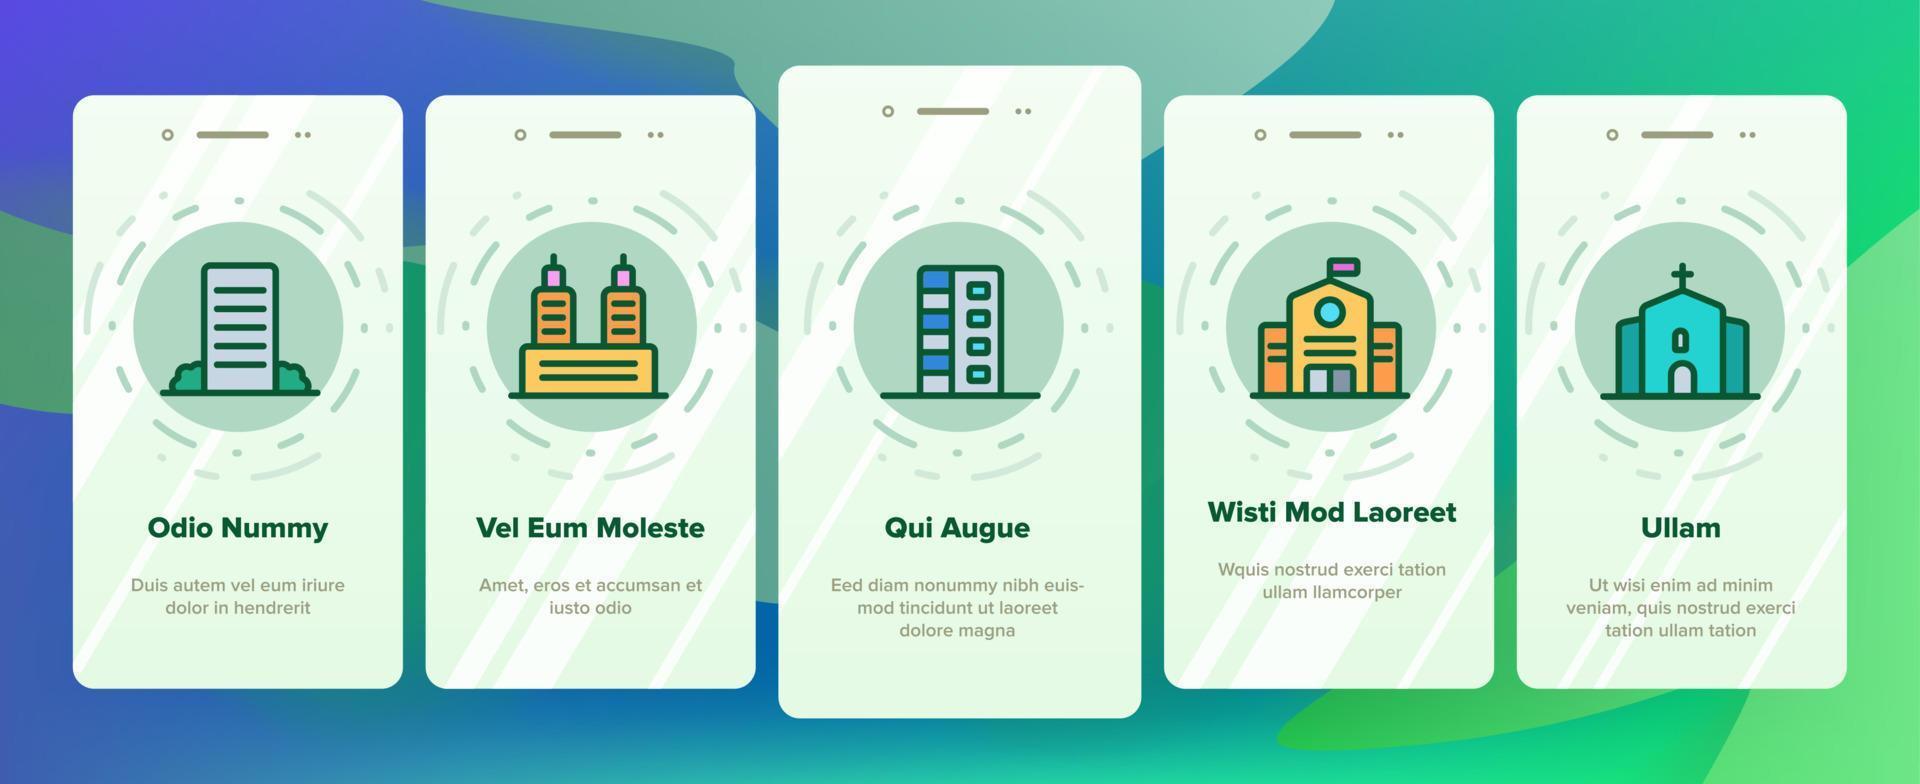 City, Town Buildings Vector Onboarding Mobile App Page Screen